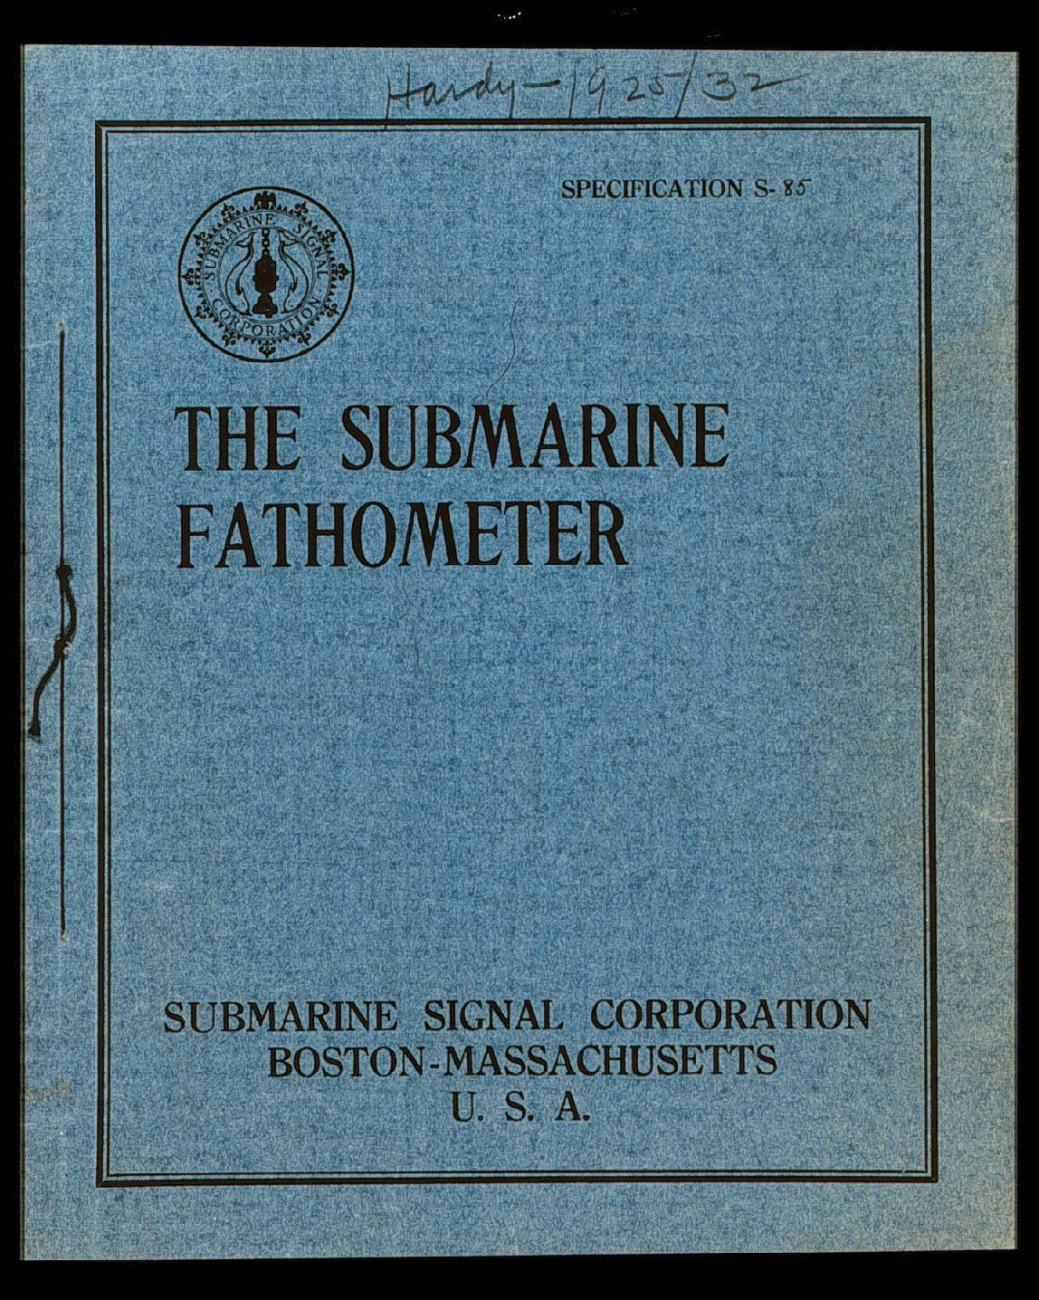 Title page to manual - The Submarine Fathometer